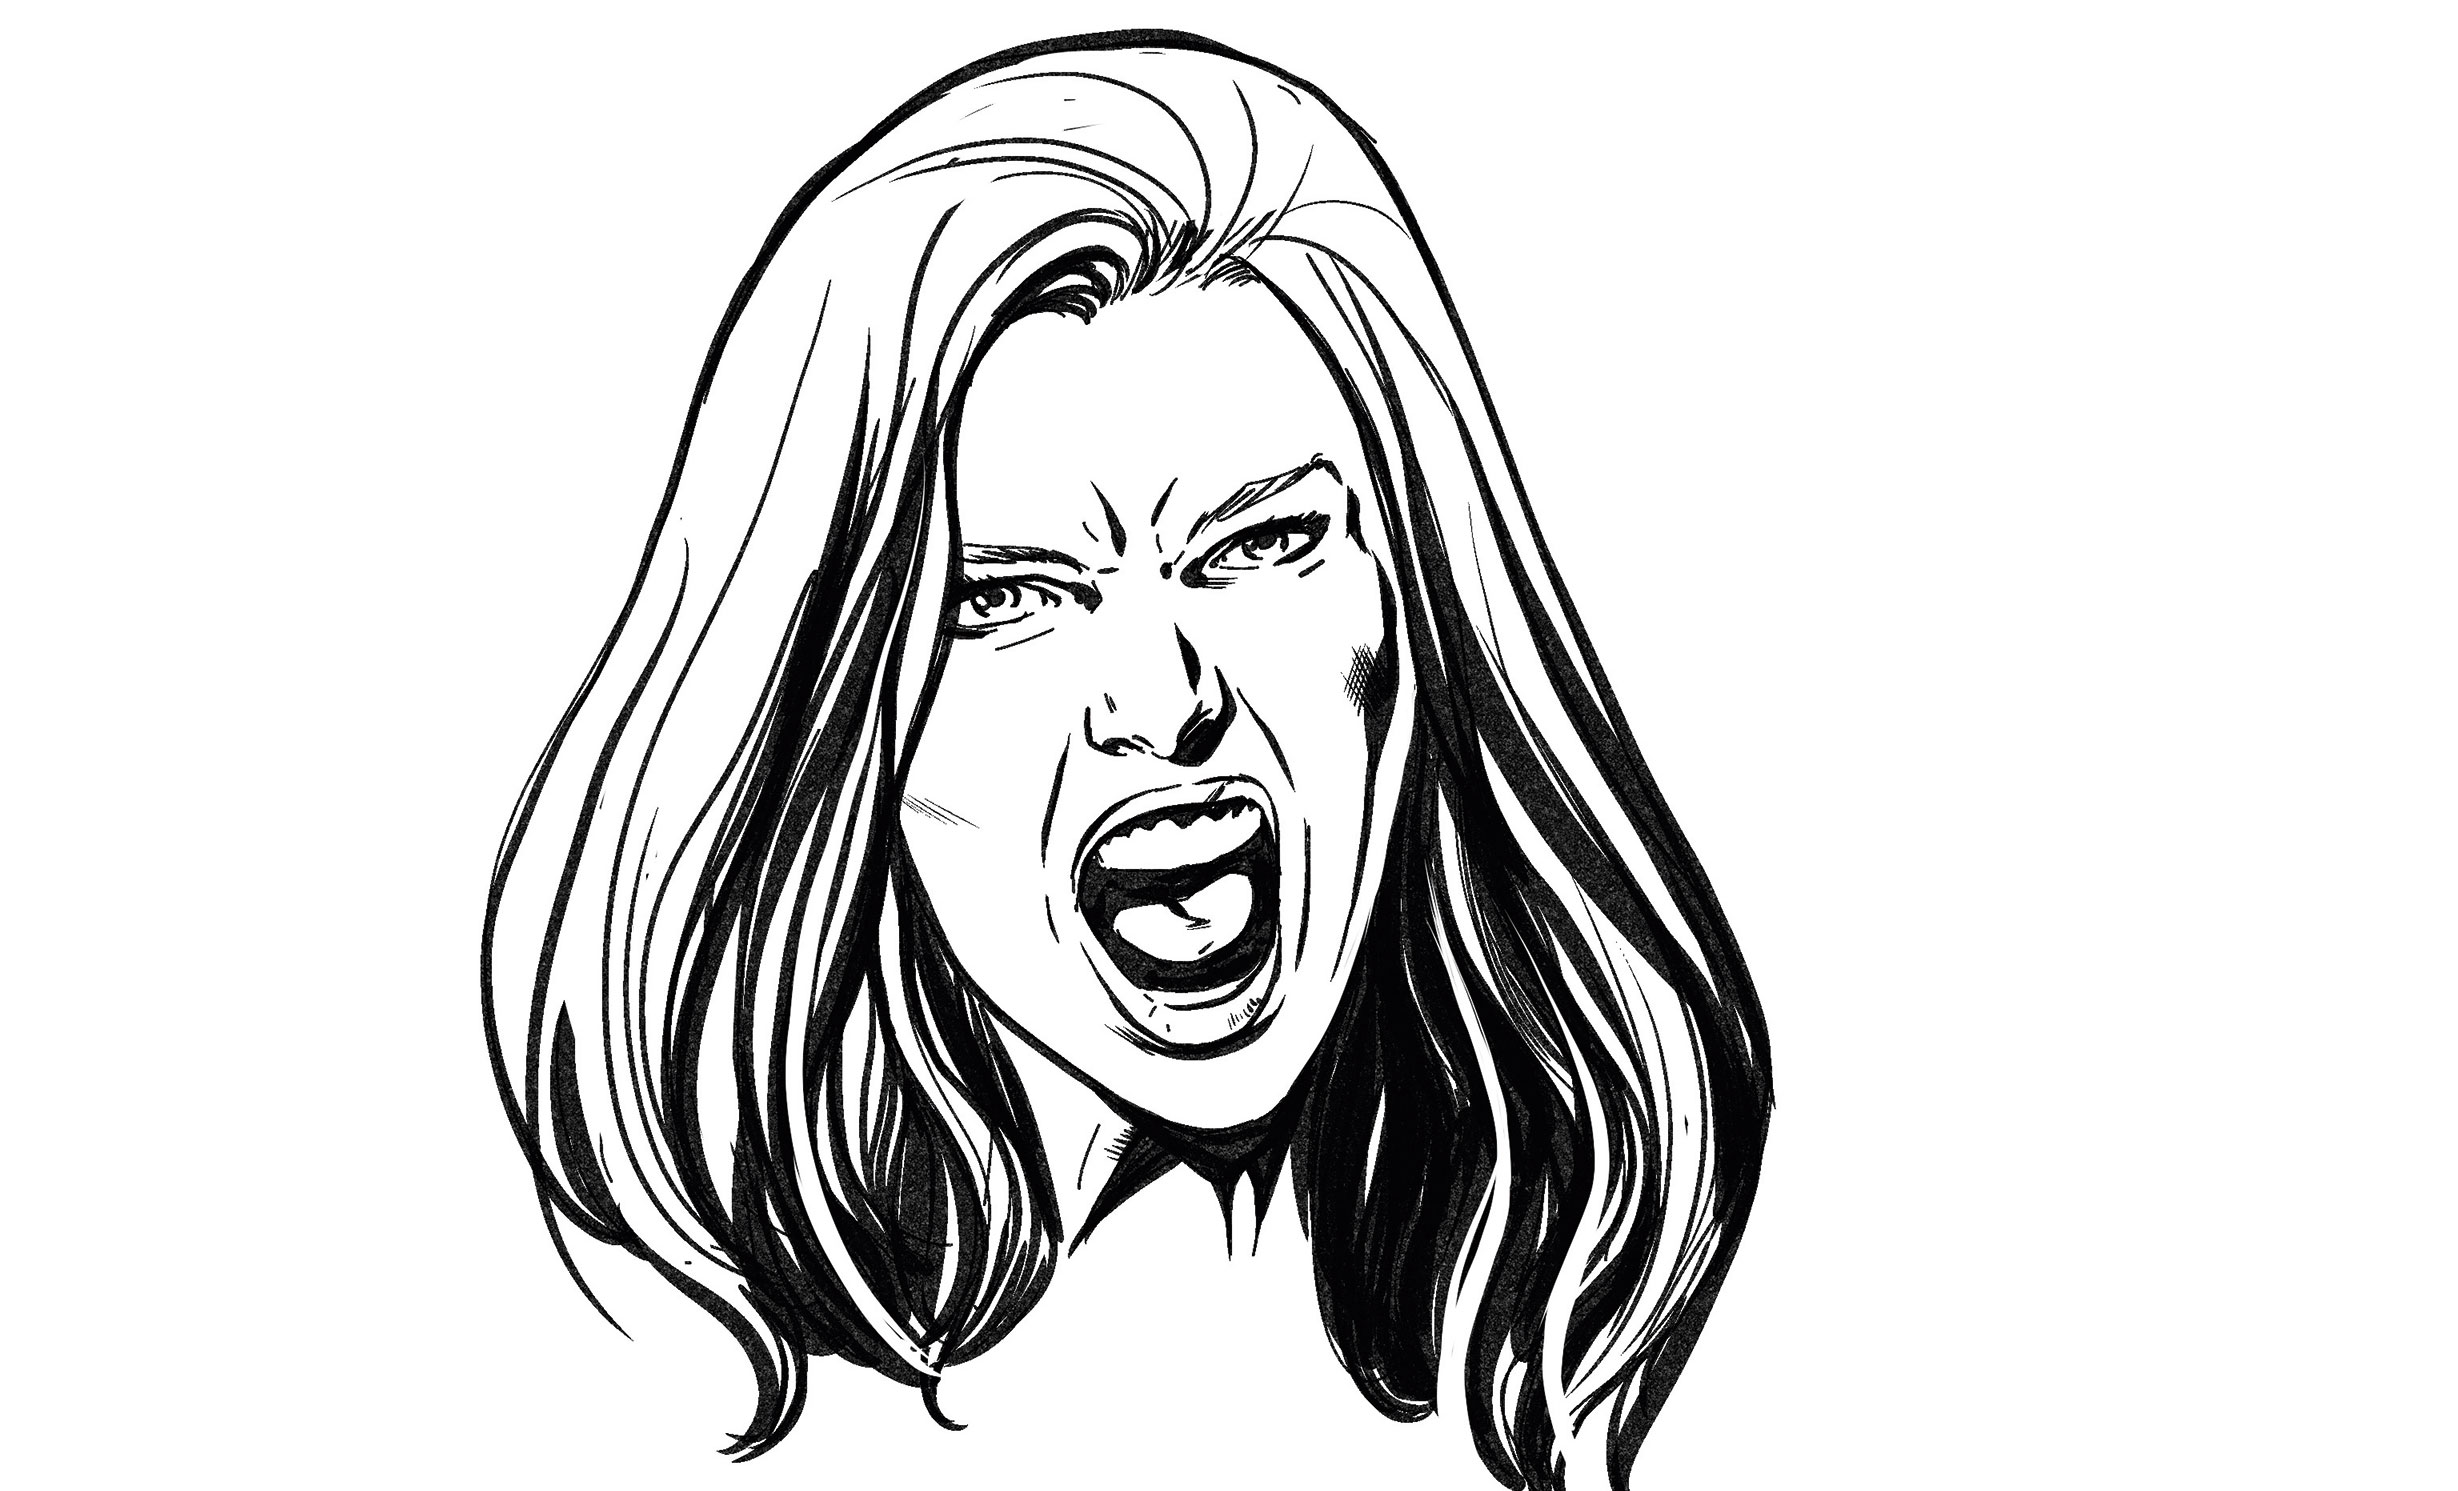 Drawing of a woman yelling